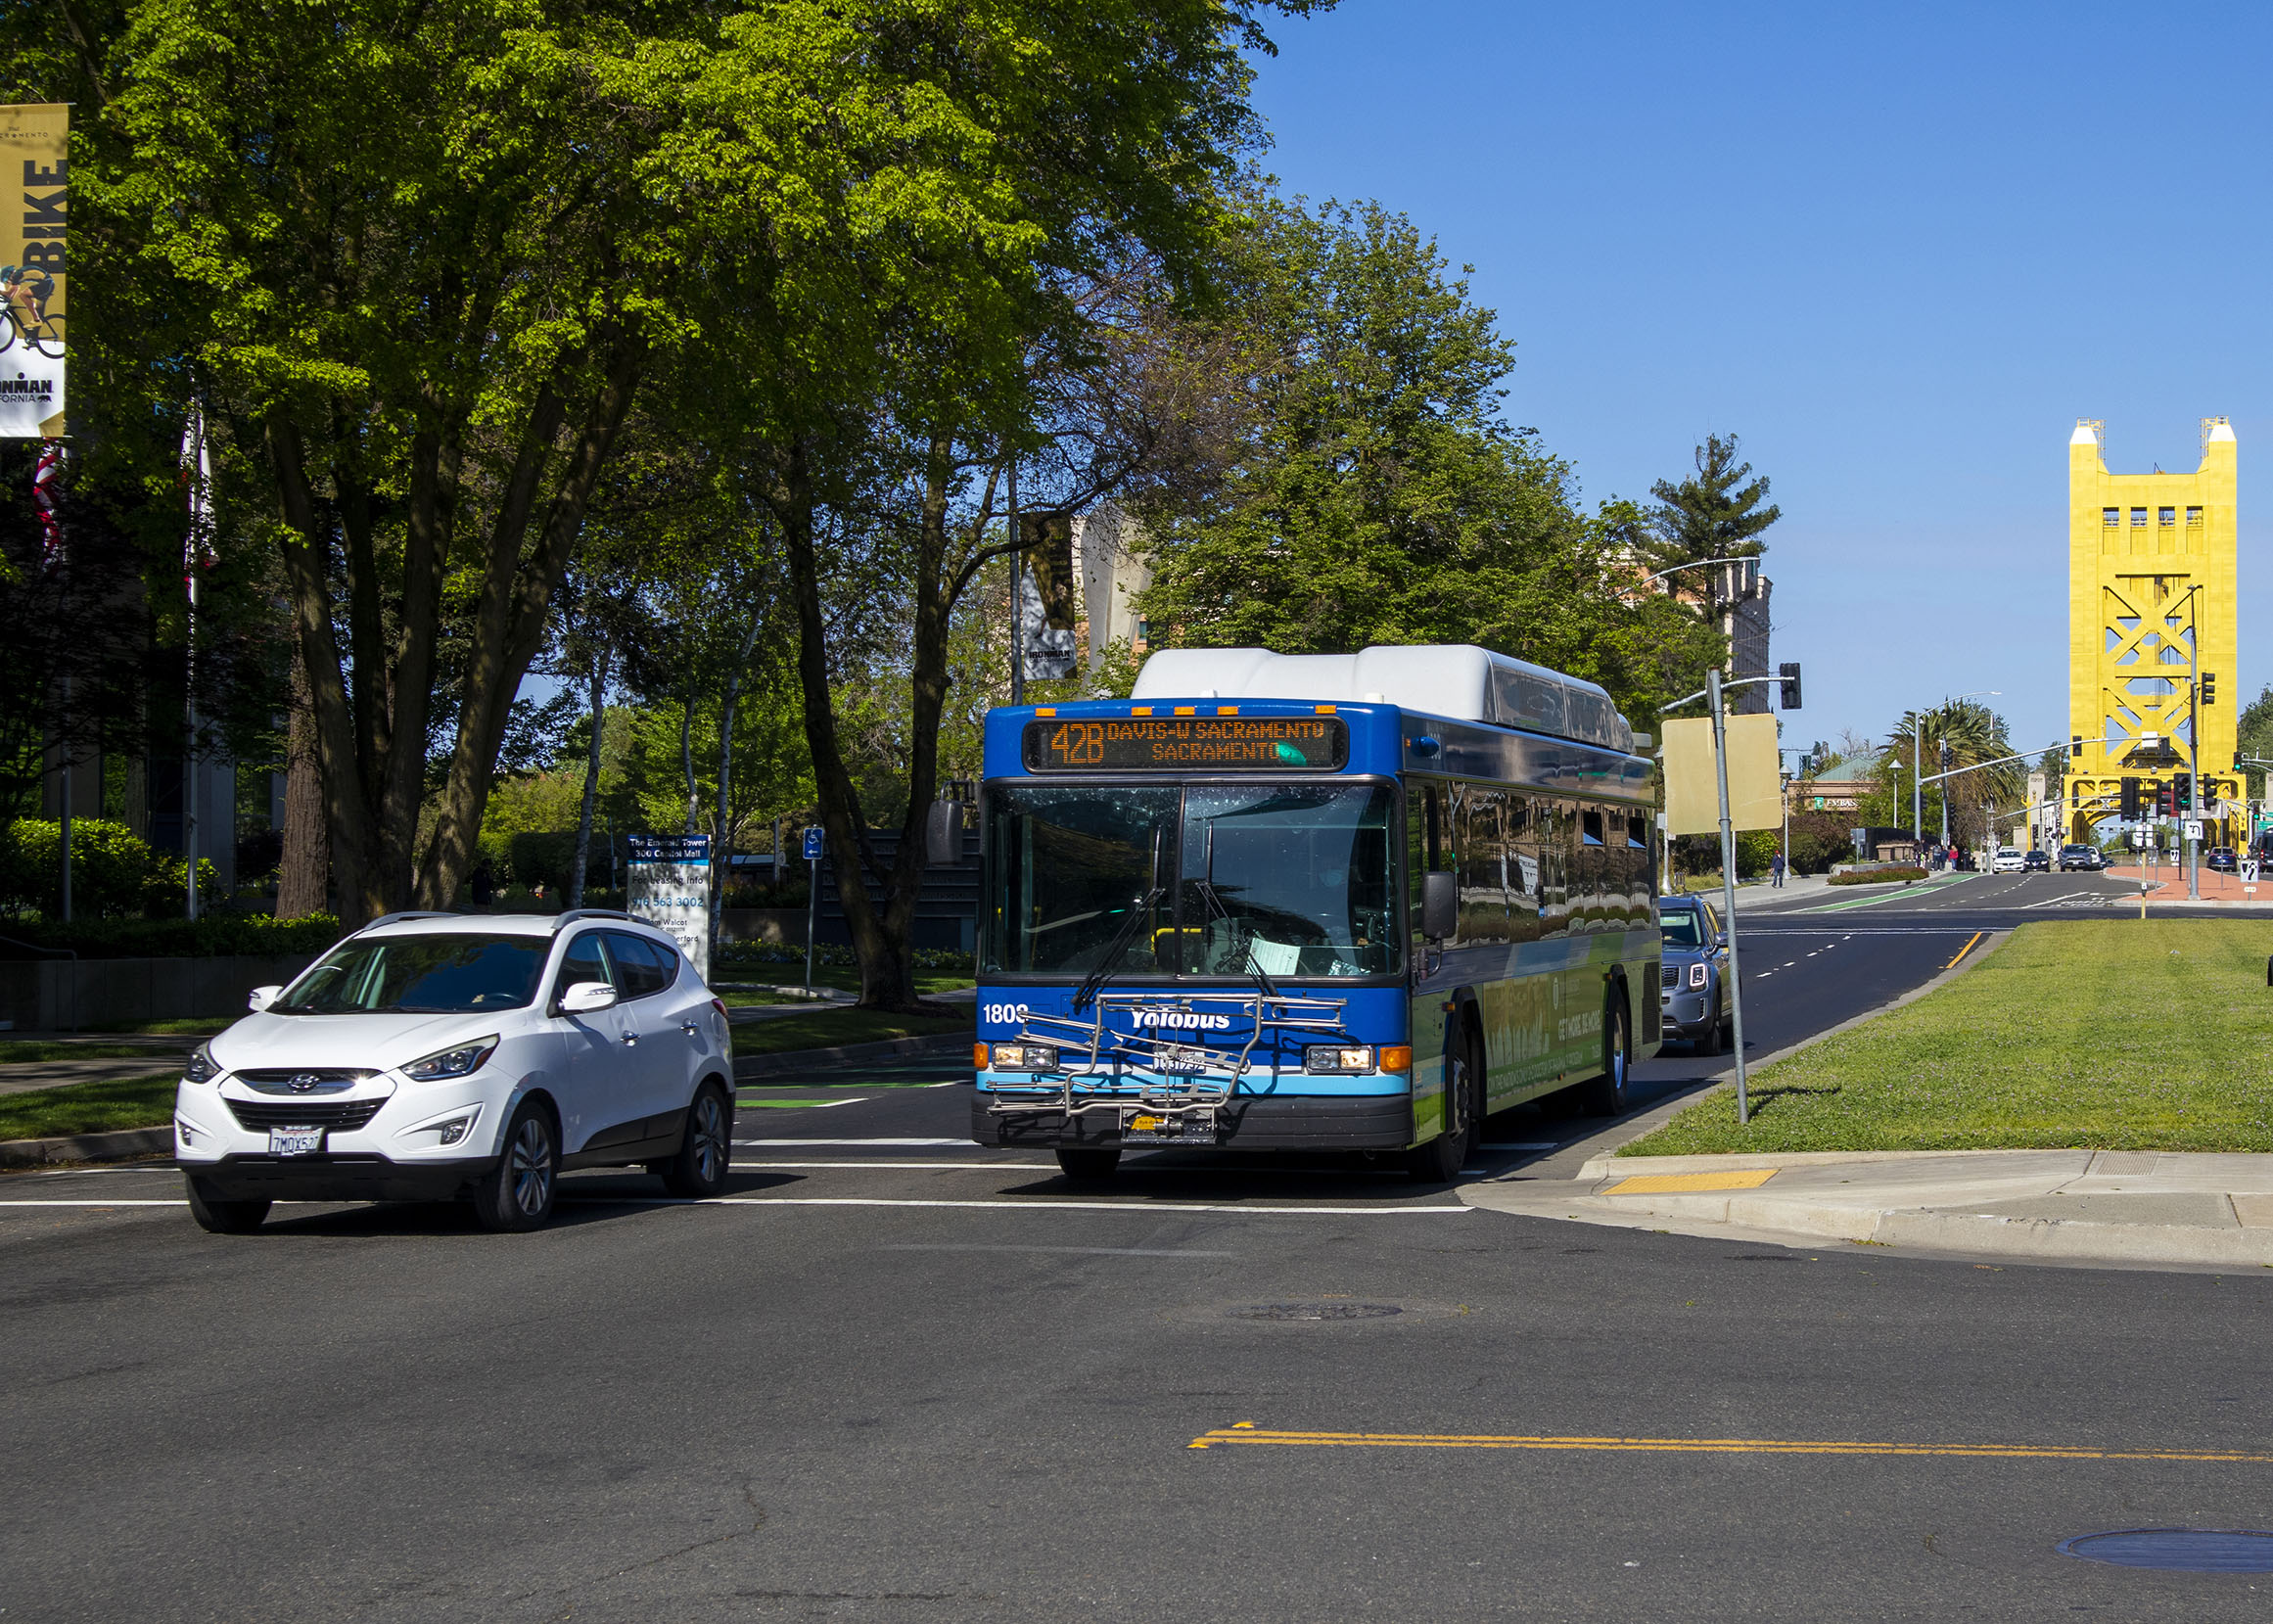 Yolobus Route 42A/B Traveling through the Capitol Mall area